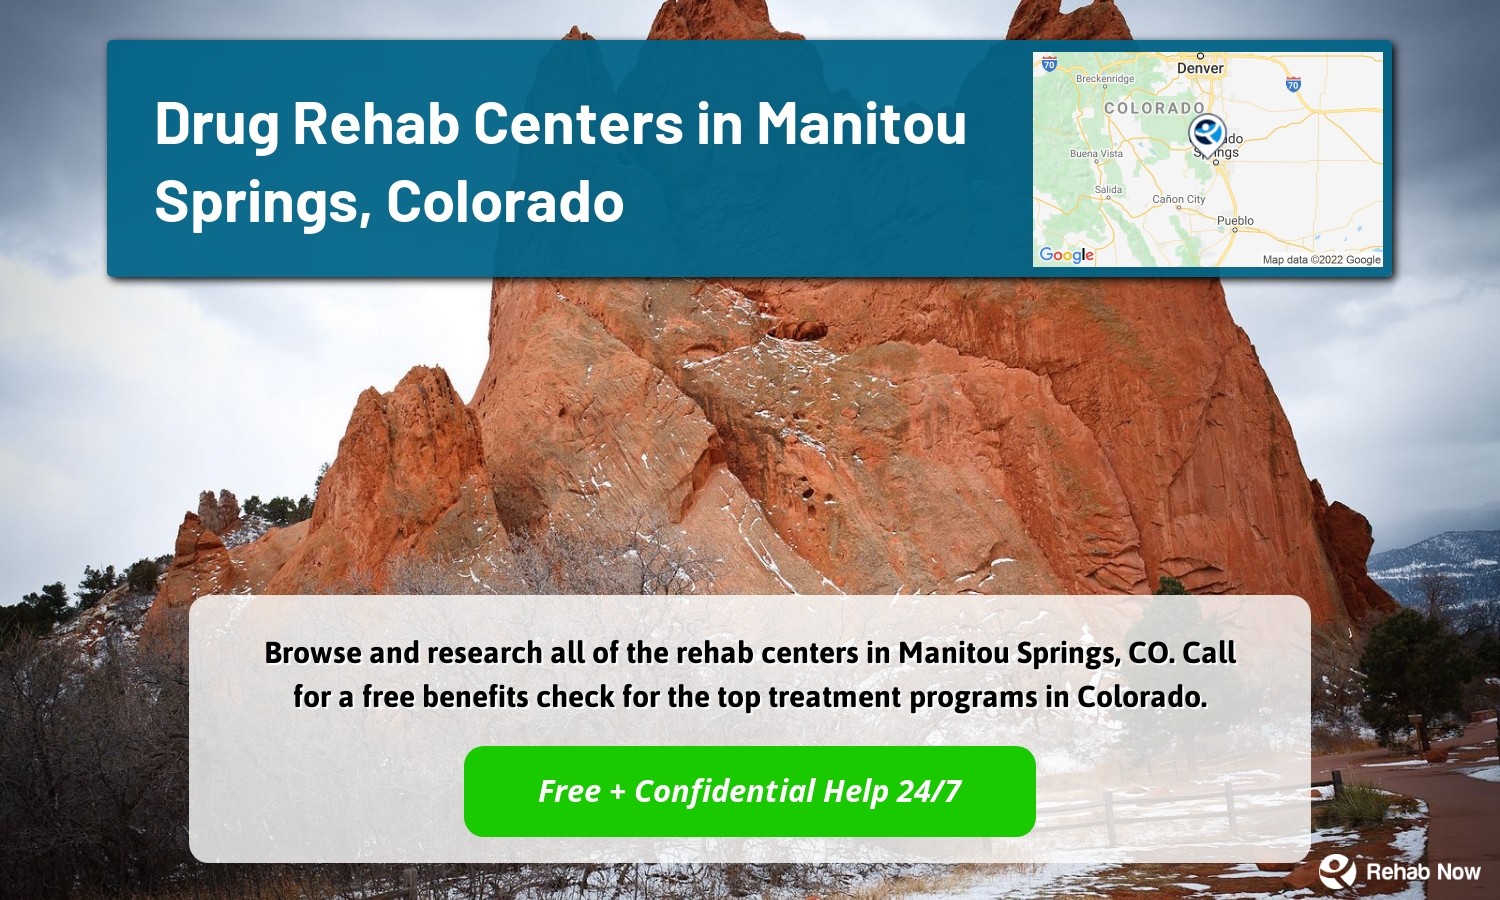 Browse and research all of the rehab centers in Manitou Springs, CO. Call for a free benefits check for the top treatment programs in Colorado.